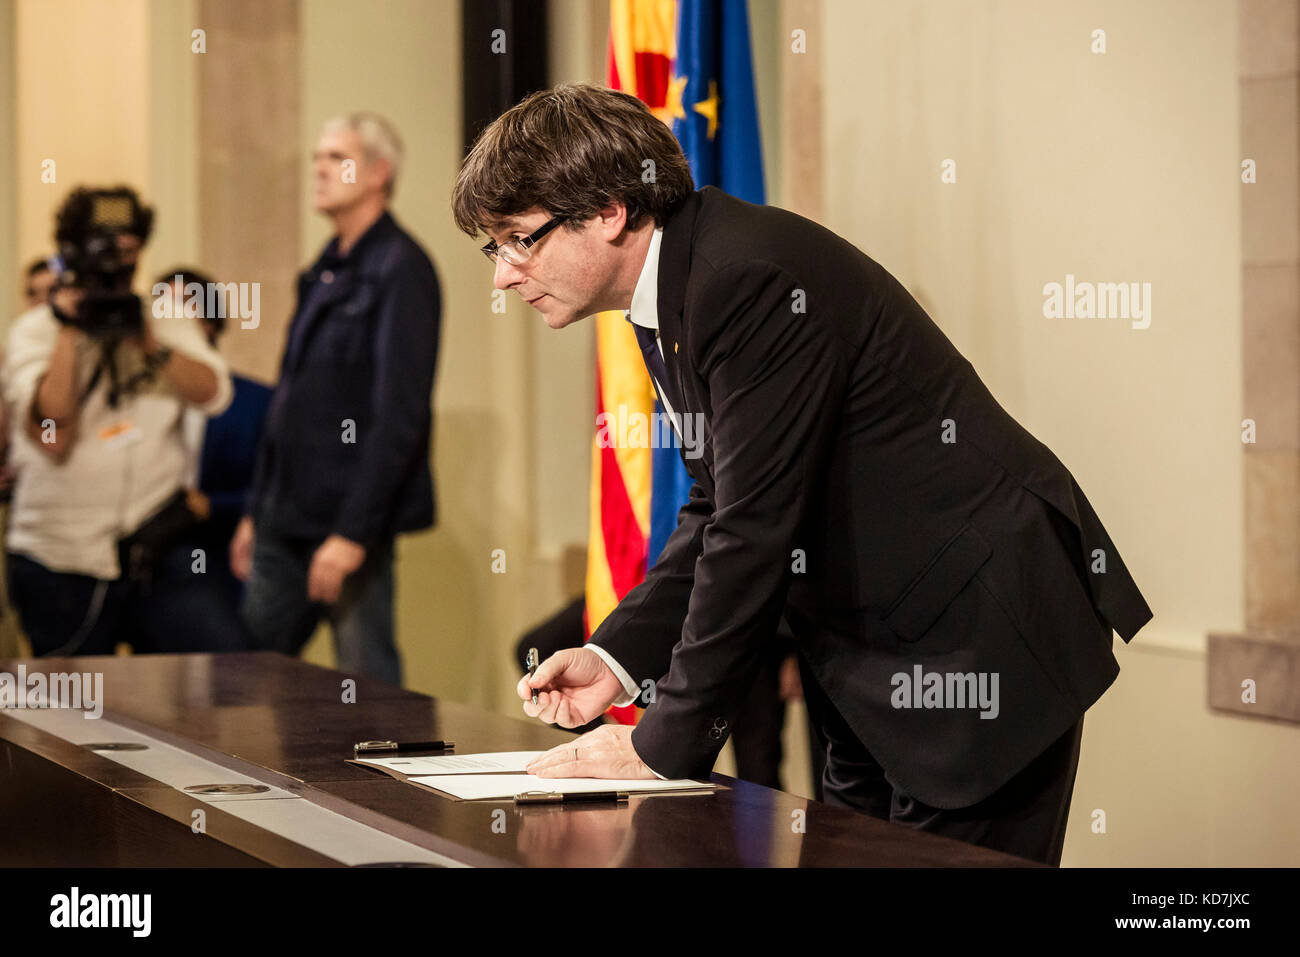 Barcelona, Spain. 10th Oct, 2017. CARLES PUIGDEMONT, President of the Generalitat of Catalonia, signs the declaration of independence at the end of an plenary session in which he postponed the independence and the proclamation of the Catalan Republic after the evaluation of the results of the October 1st secession referendum. Spain's Central Government denies that there have been a referendum and does not accept the result as the Catalan referendum law had been suspended by Spain's constitutional court Credit: Matthias Oesterle/Alamy Live News Stock Photo